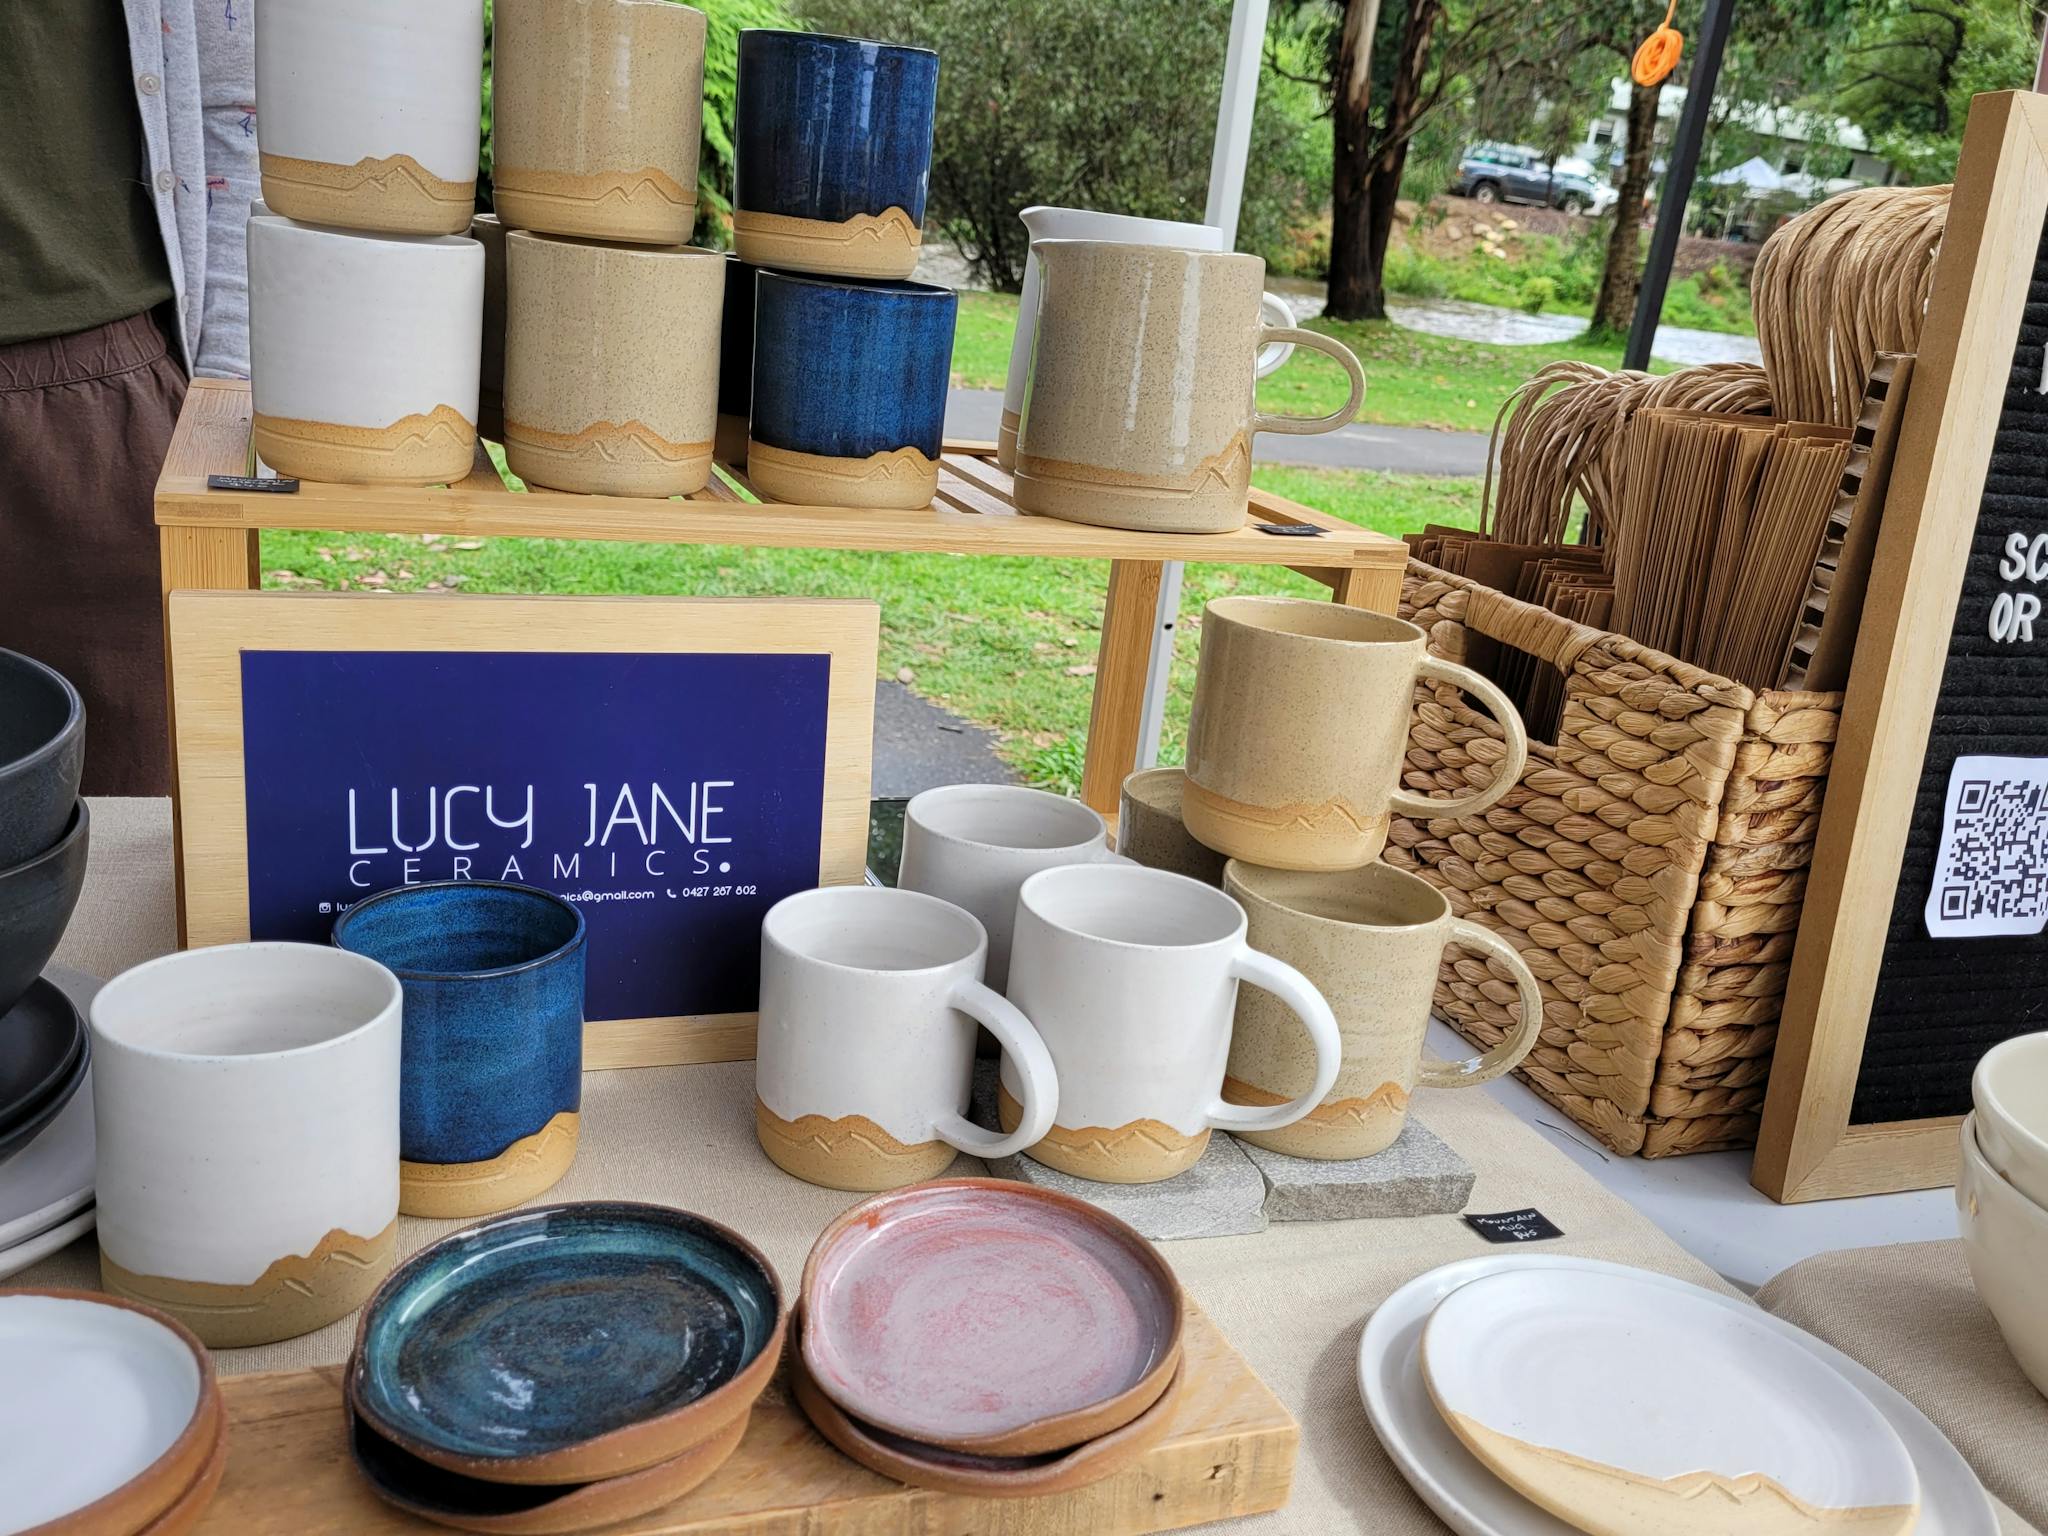 Ceramic Cups and plates on display to buy